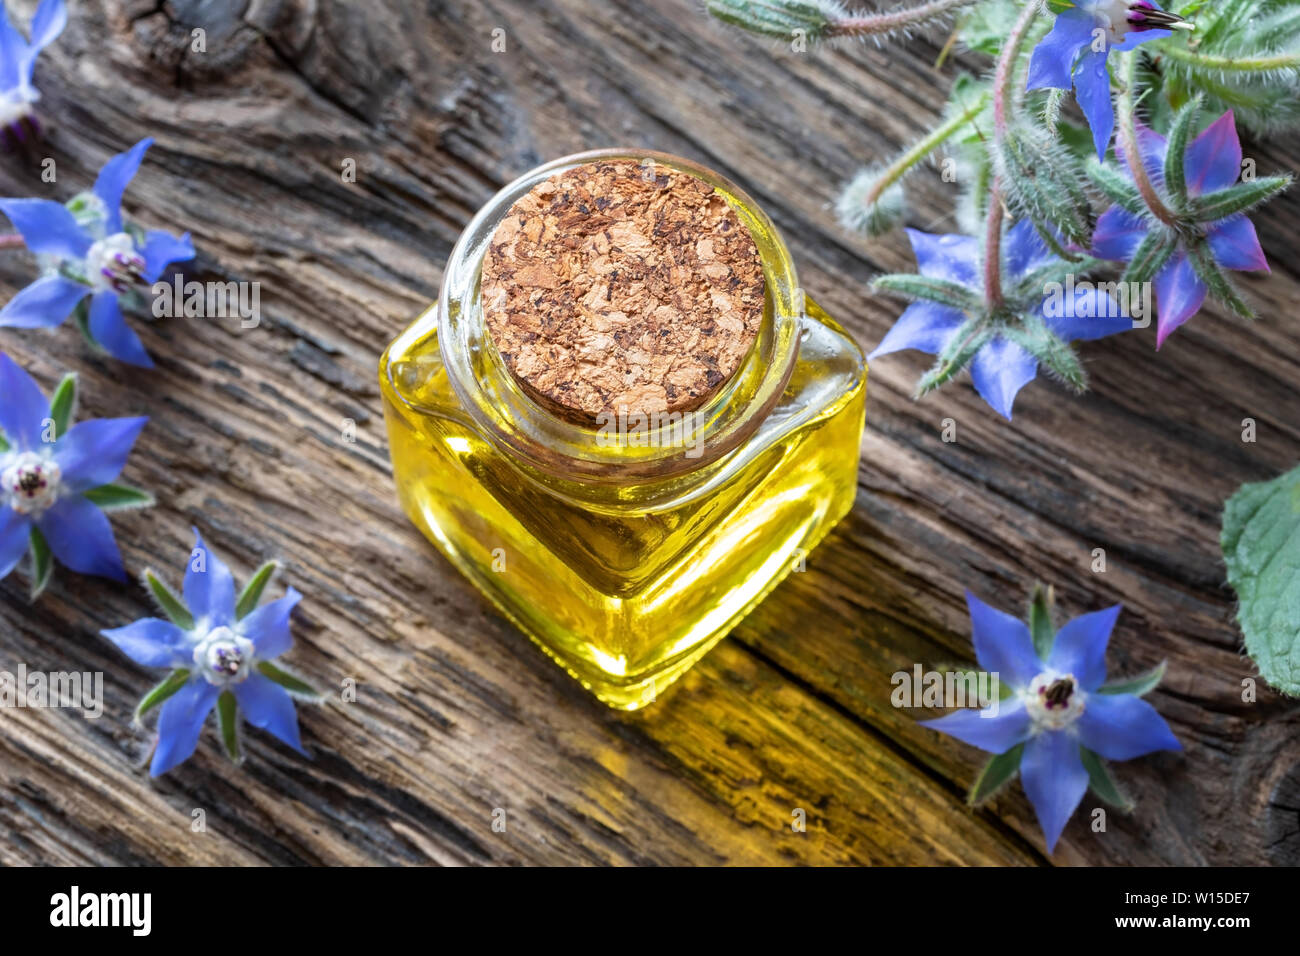 A bottle of borage oil with fresh blooming plant on a table Stock Photo